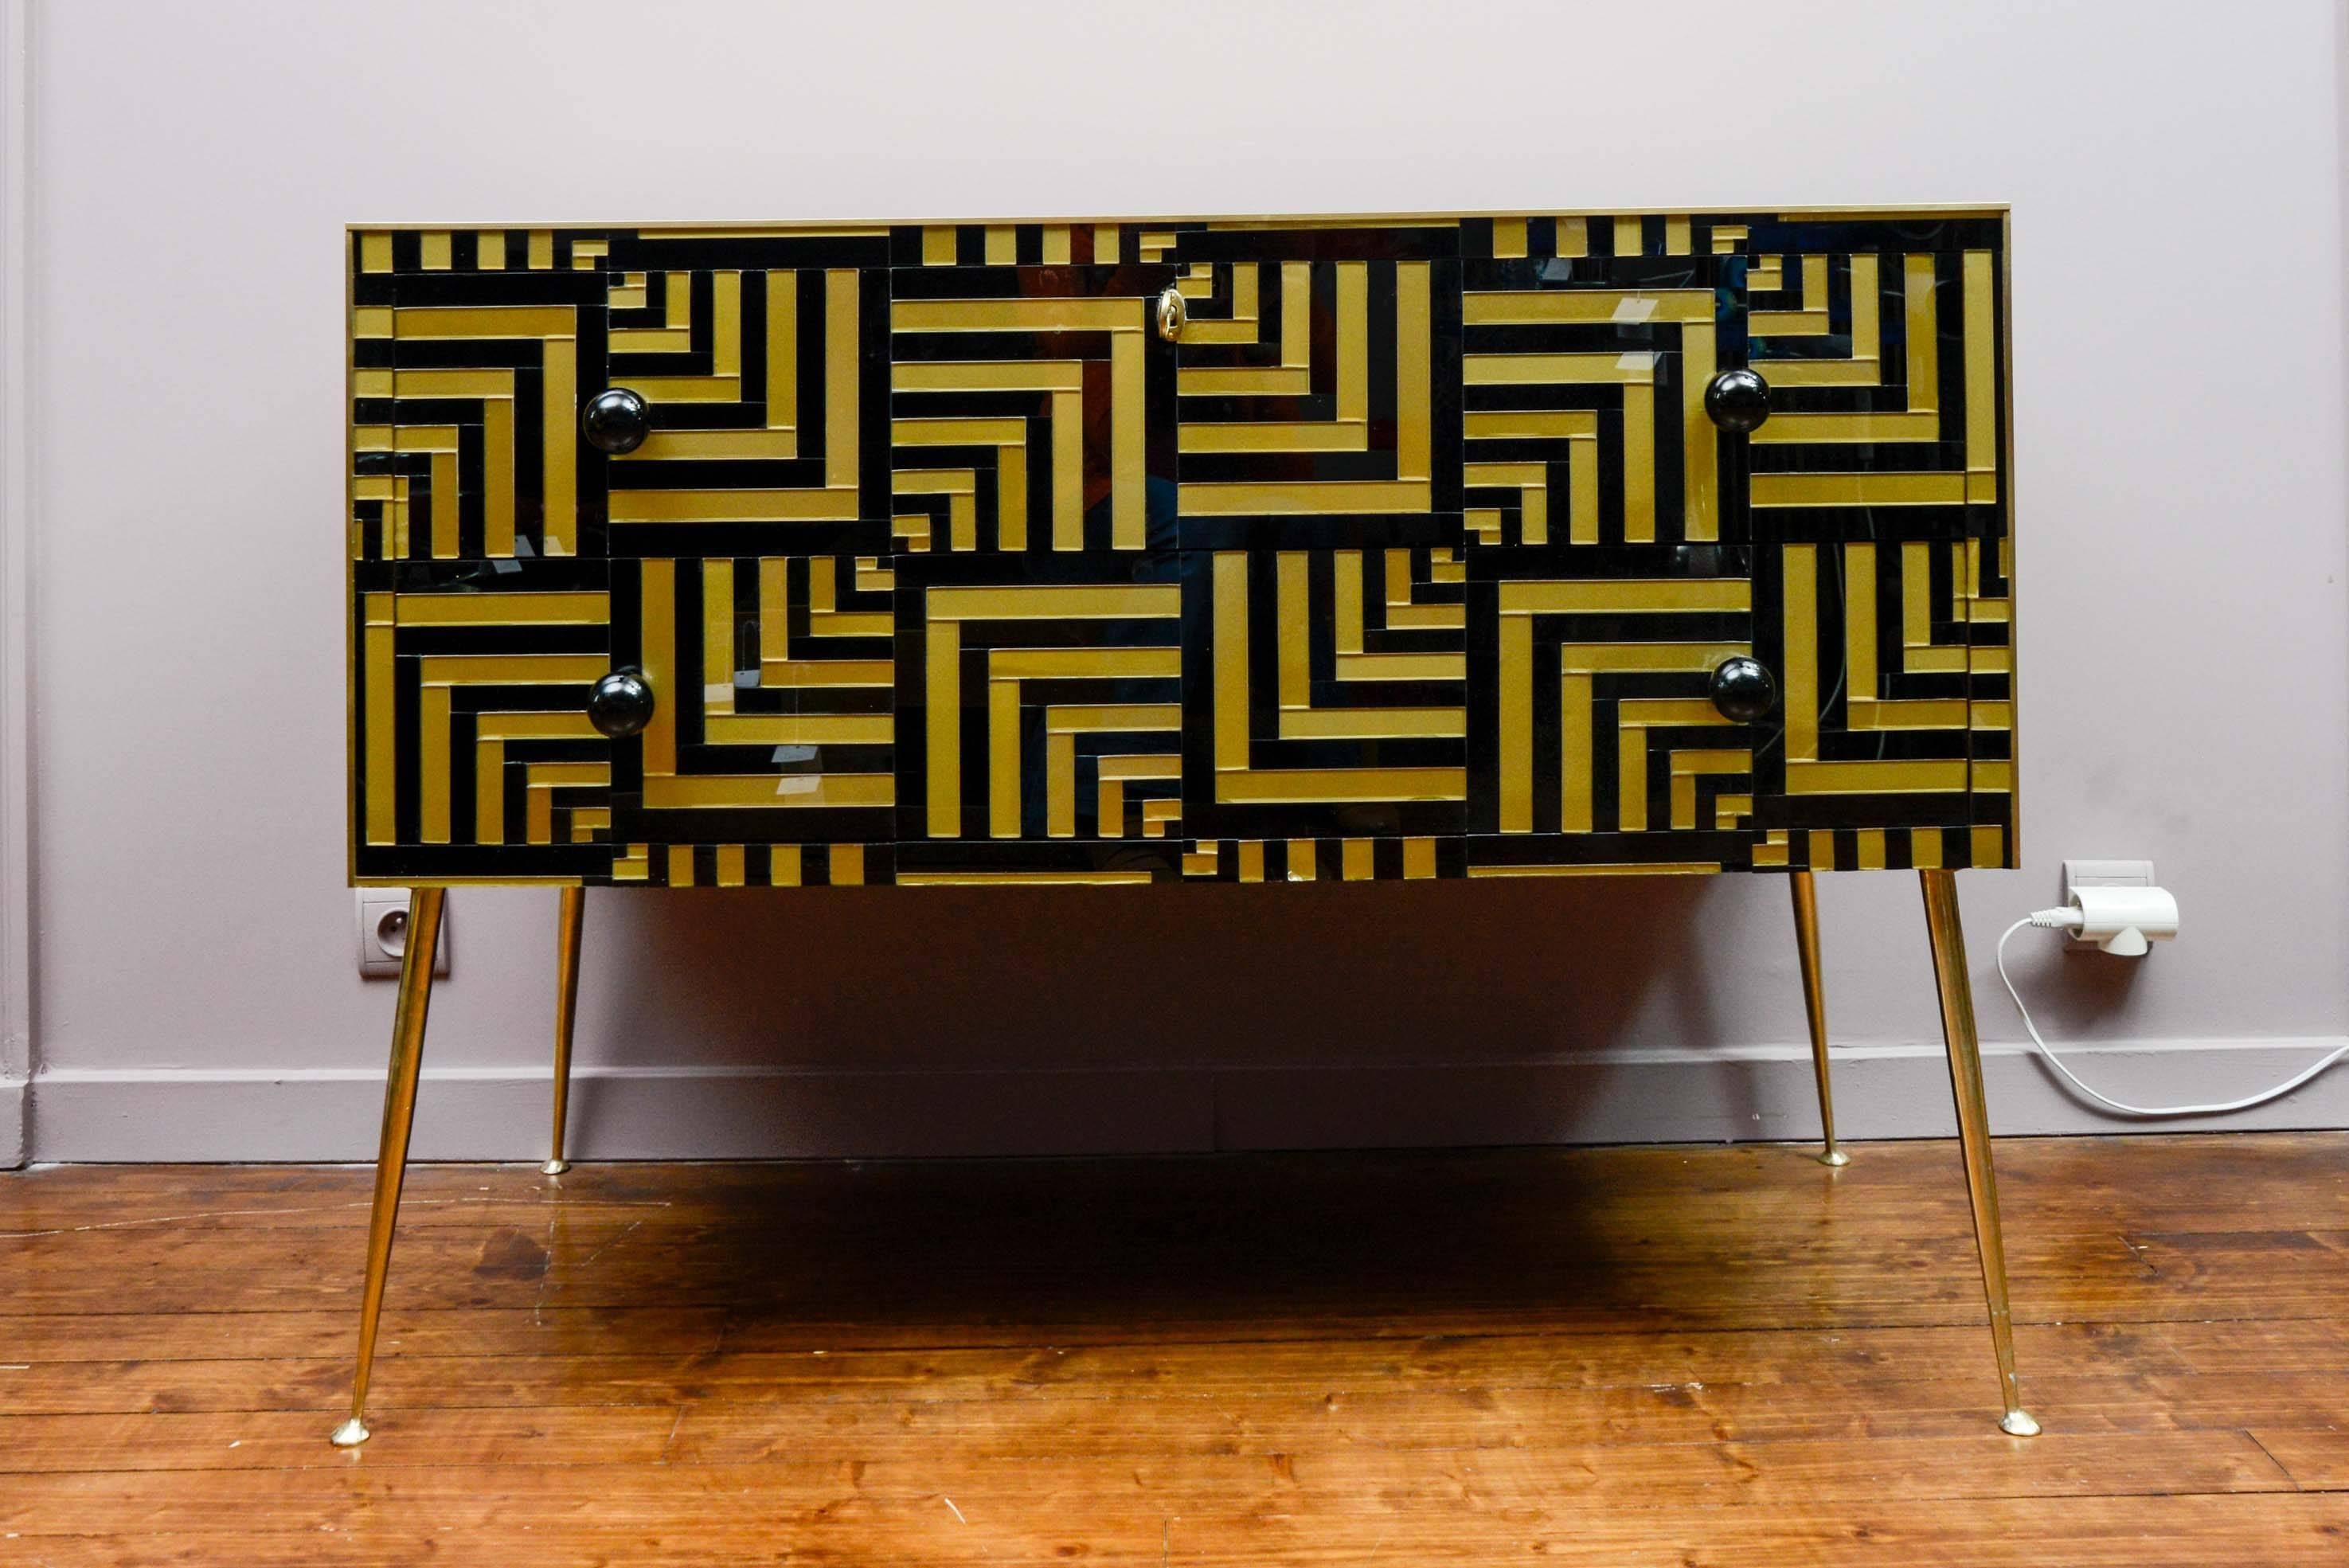 Pair of vintage chests of drawers, geometrical black and gold designs on the doors, four brass feet, two drawers.